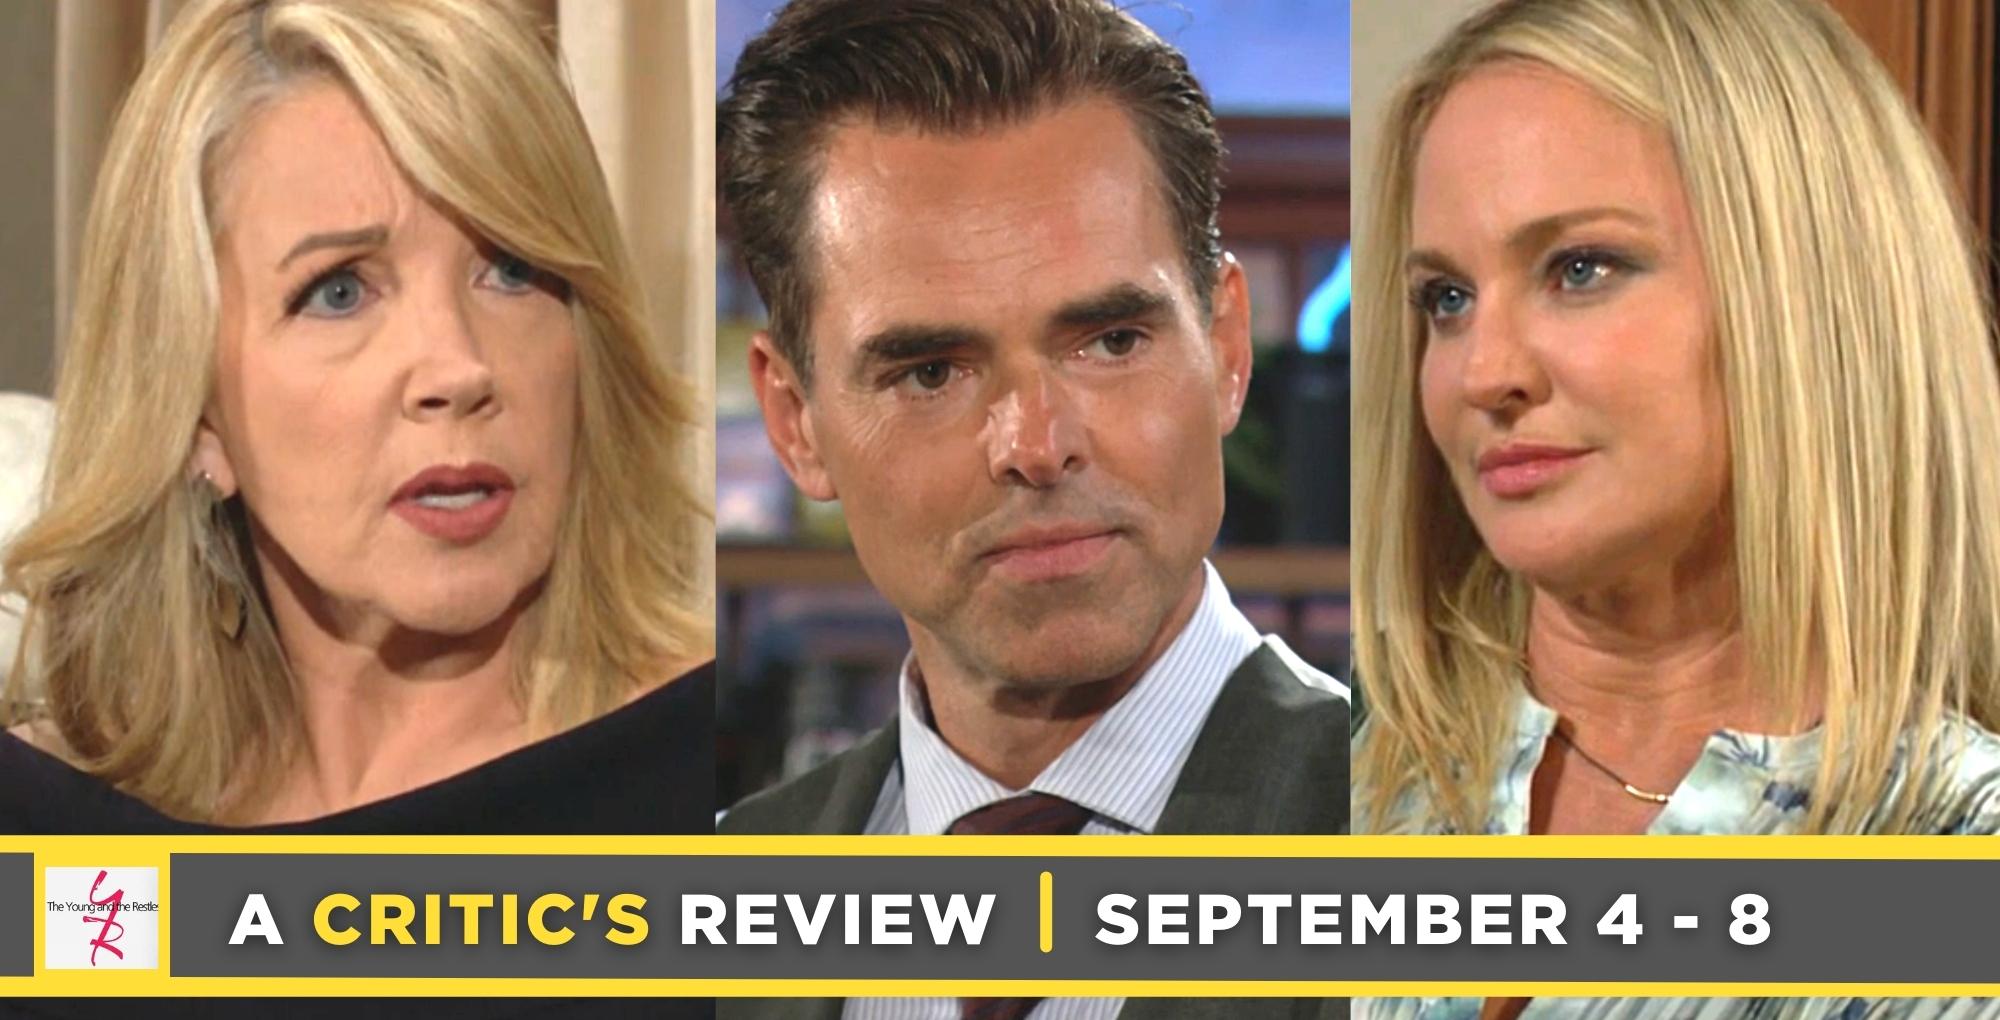 the young and the restless critic's review for september 4 – september 8, 2023, three images, nikki, billy, and sharon.